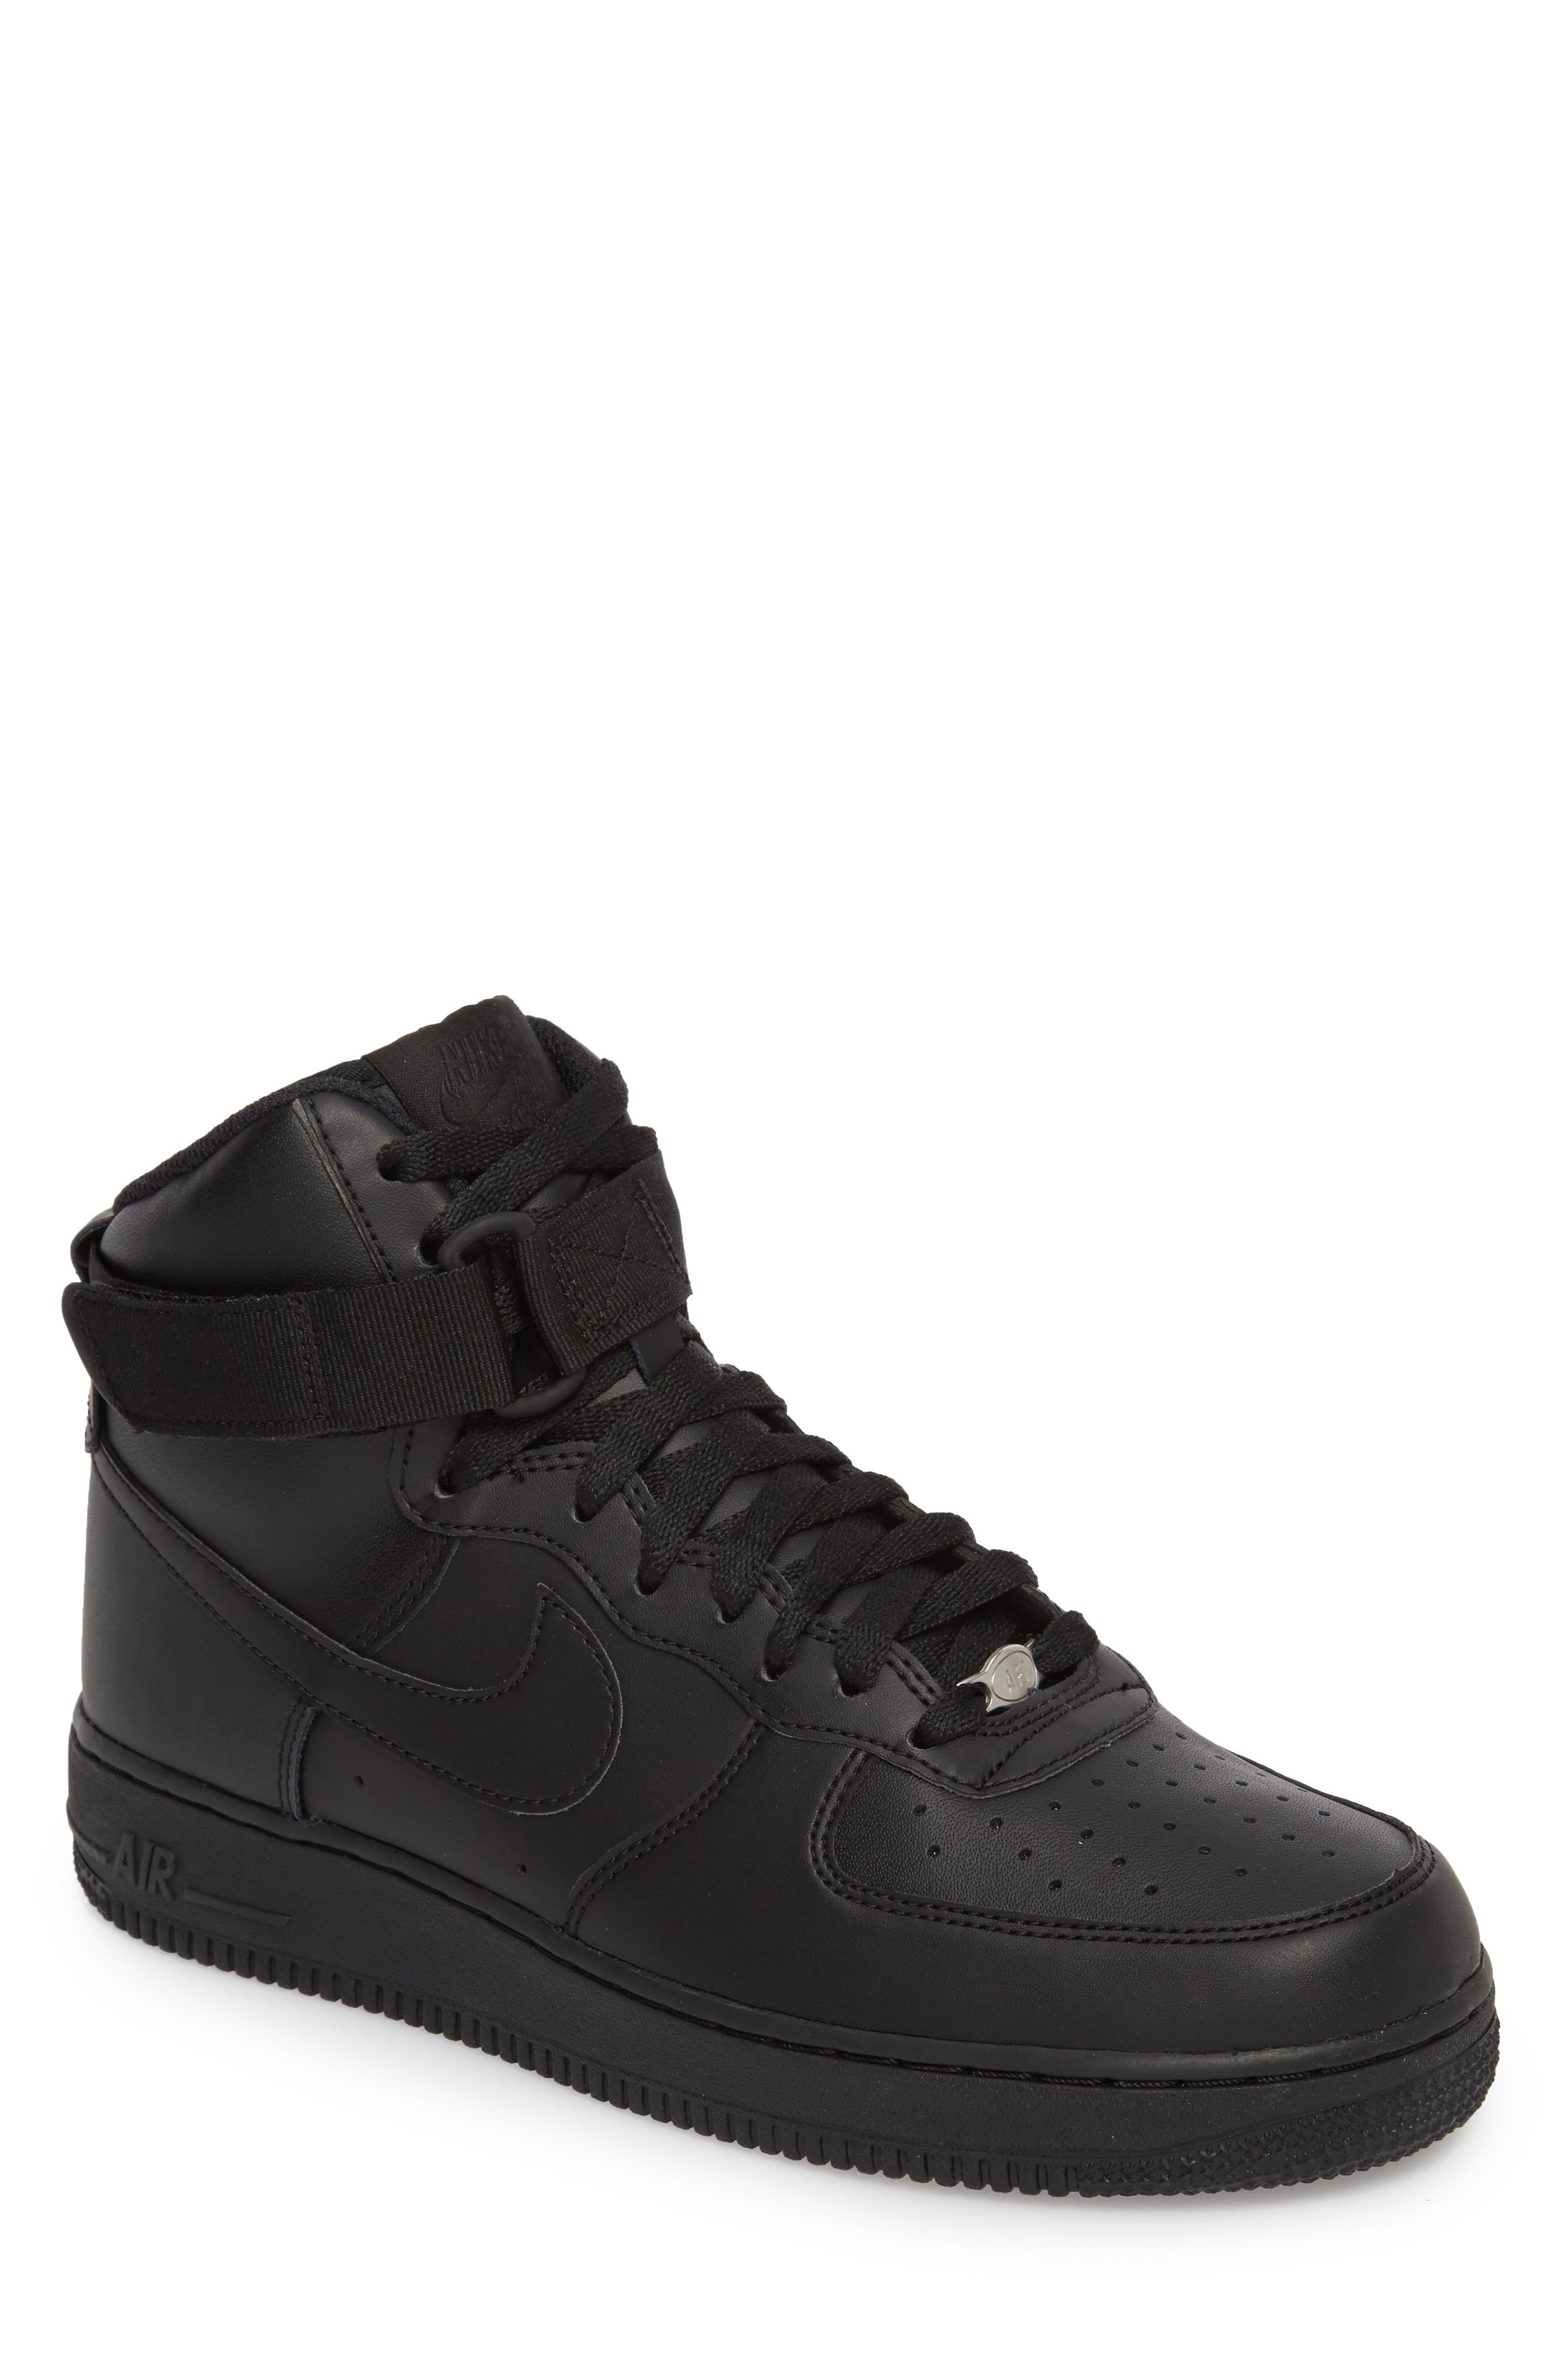 UPC 888409448032 product image for Men's Nike Air Force 1 High '07 Sneaker, Size 9.5 M - Black | upcitemdb.com